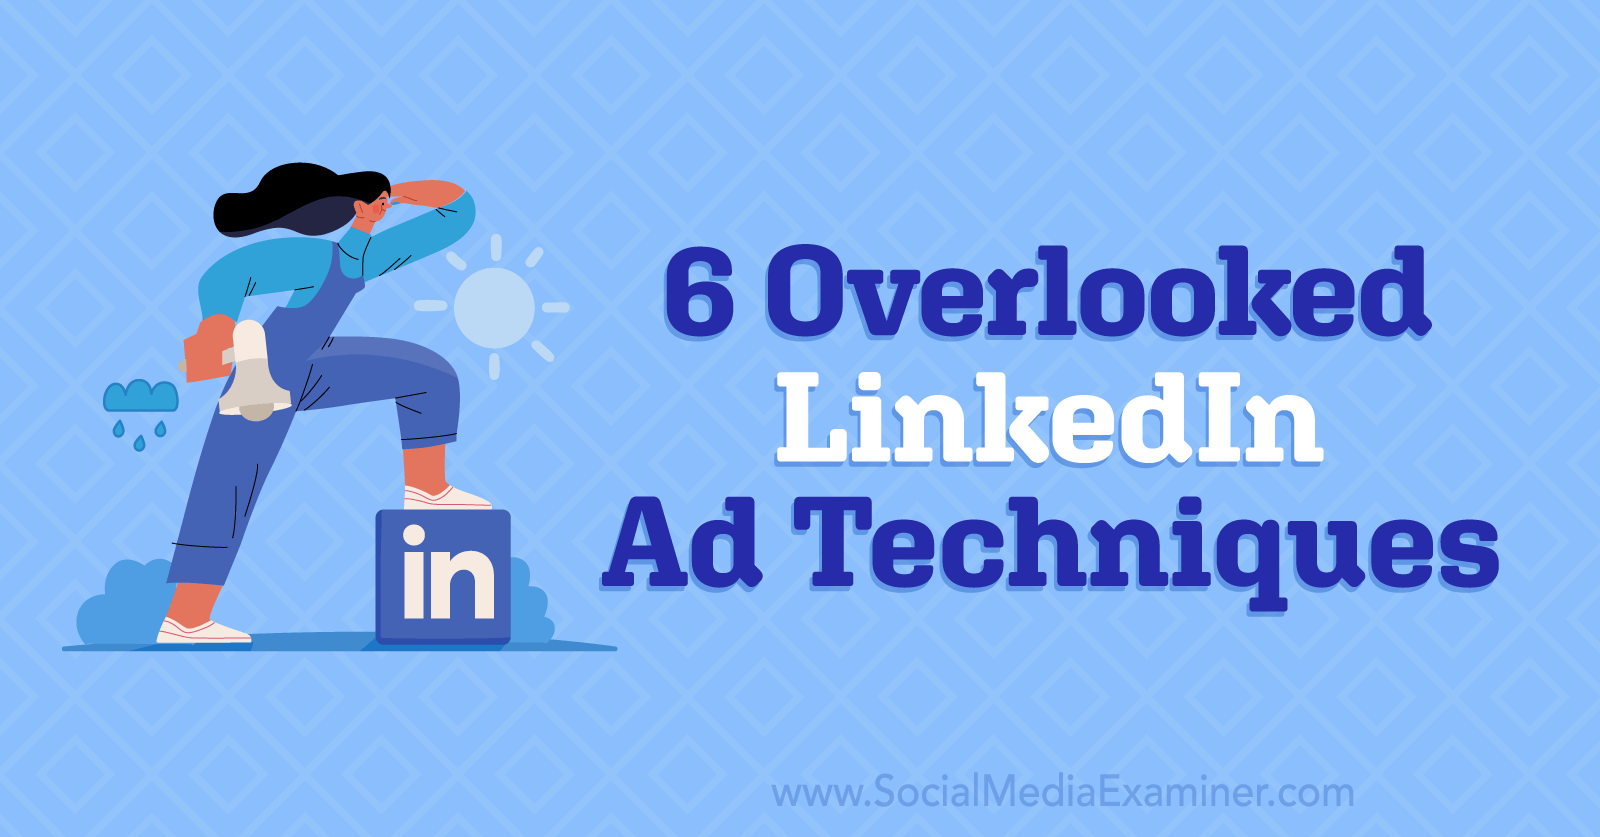 6 Overlooked LinkedIn Ad Techniques by Anna Sonnenberg on Social Media Examiner